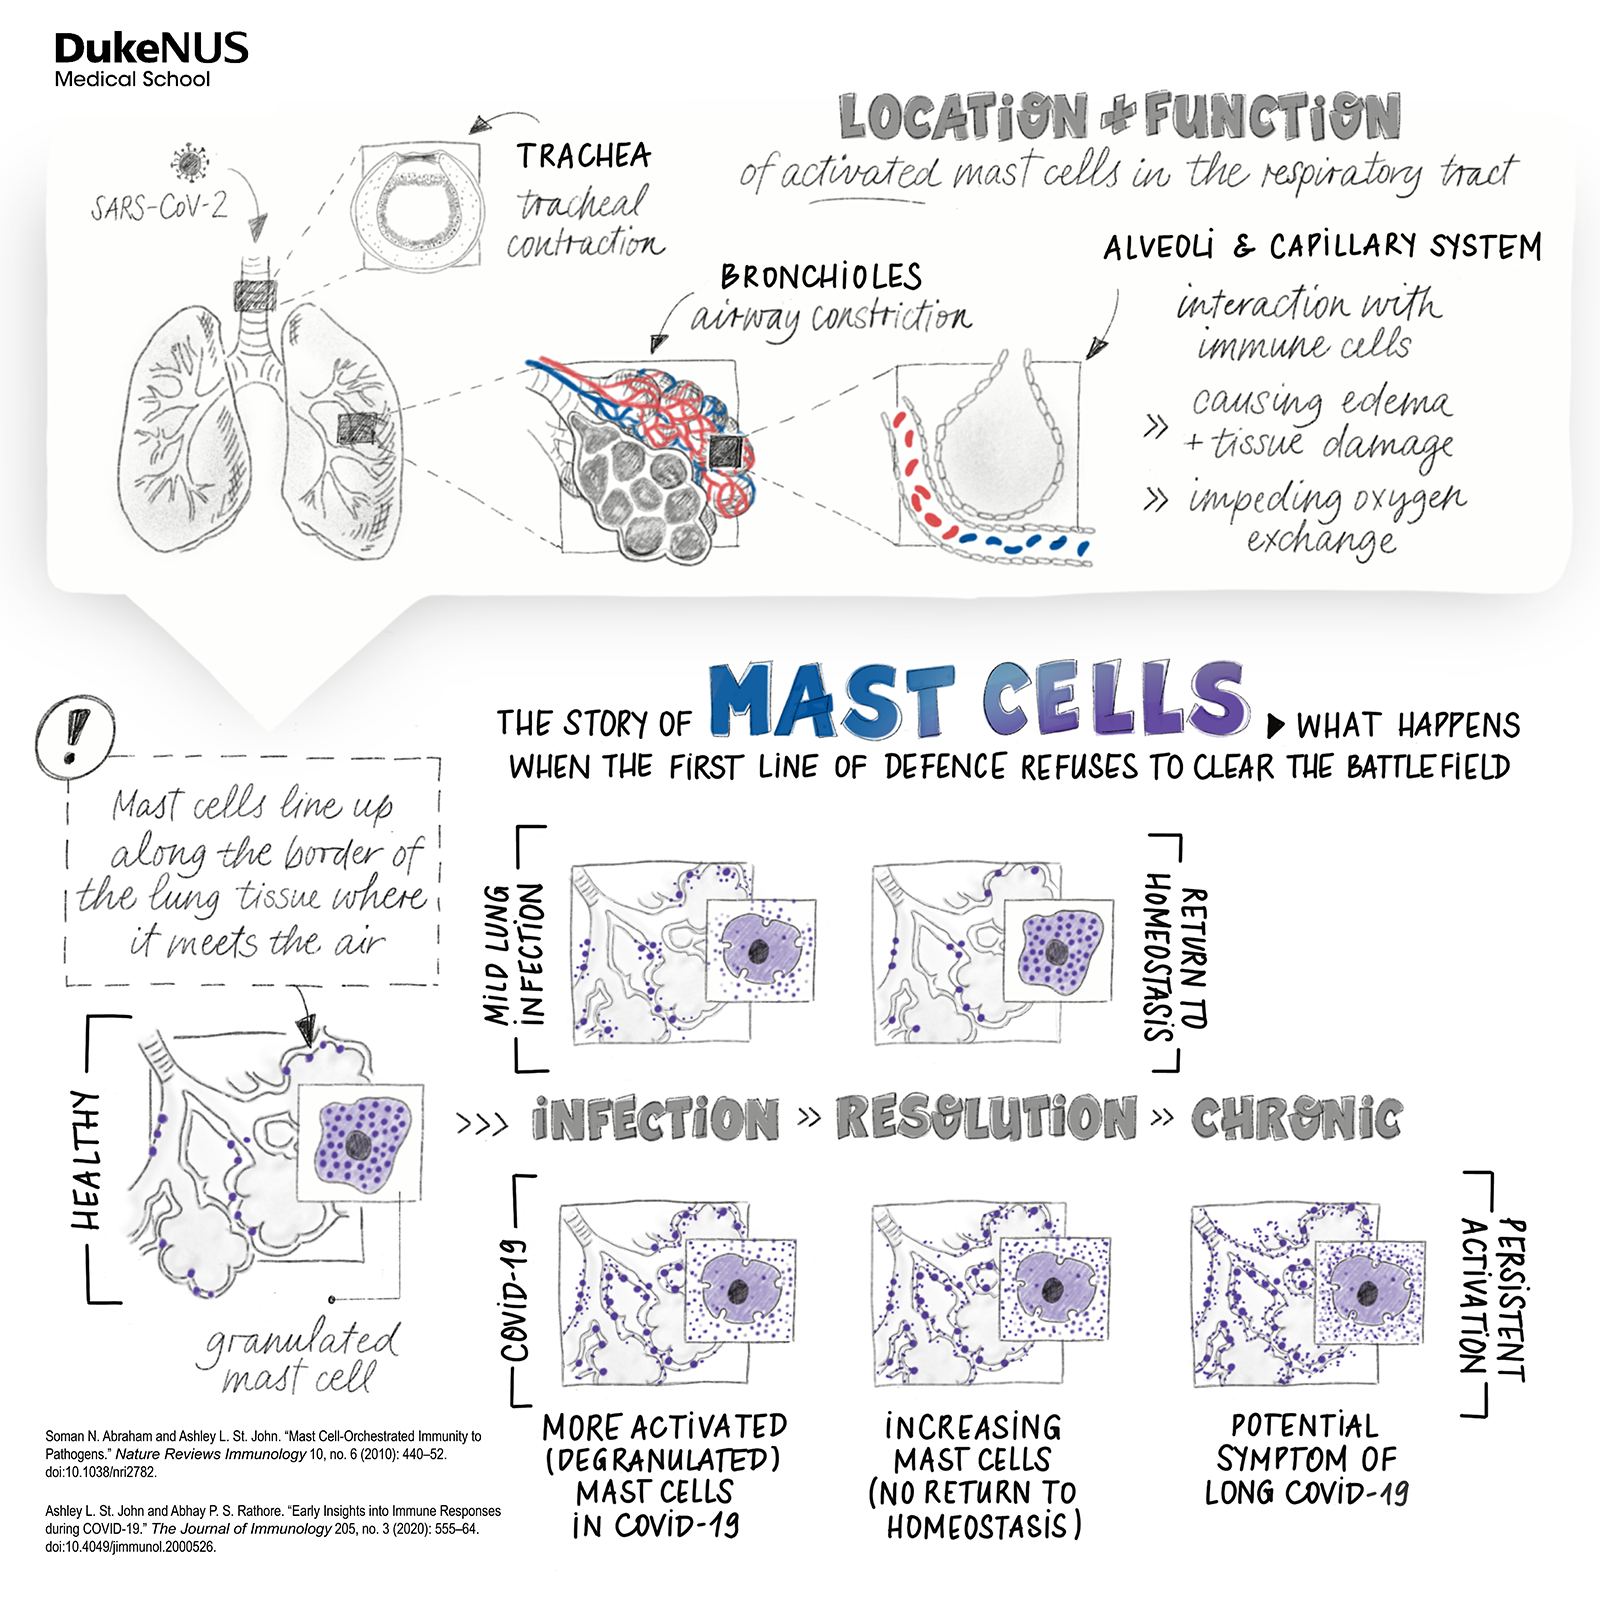 The story of mast cells